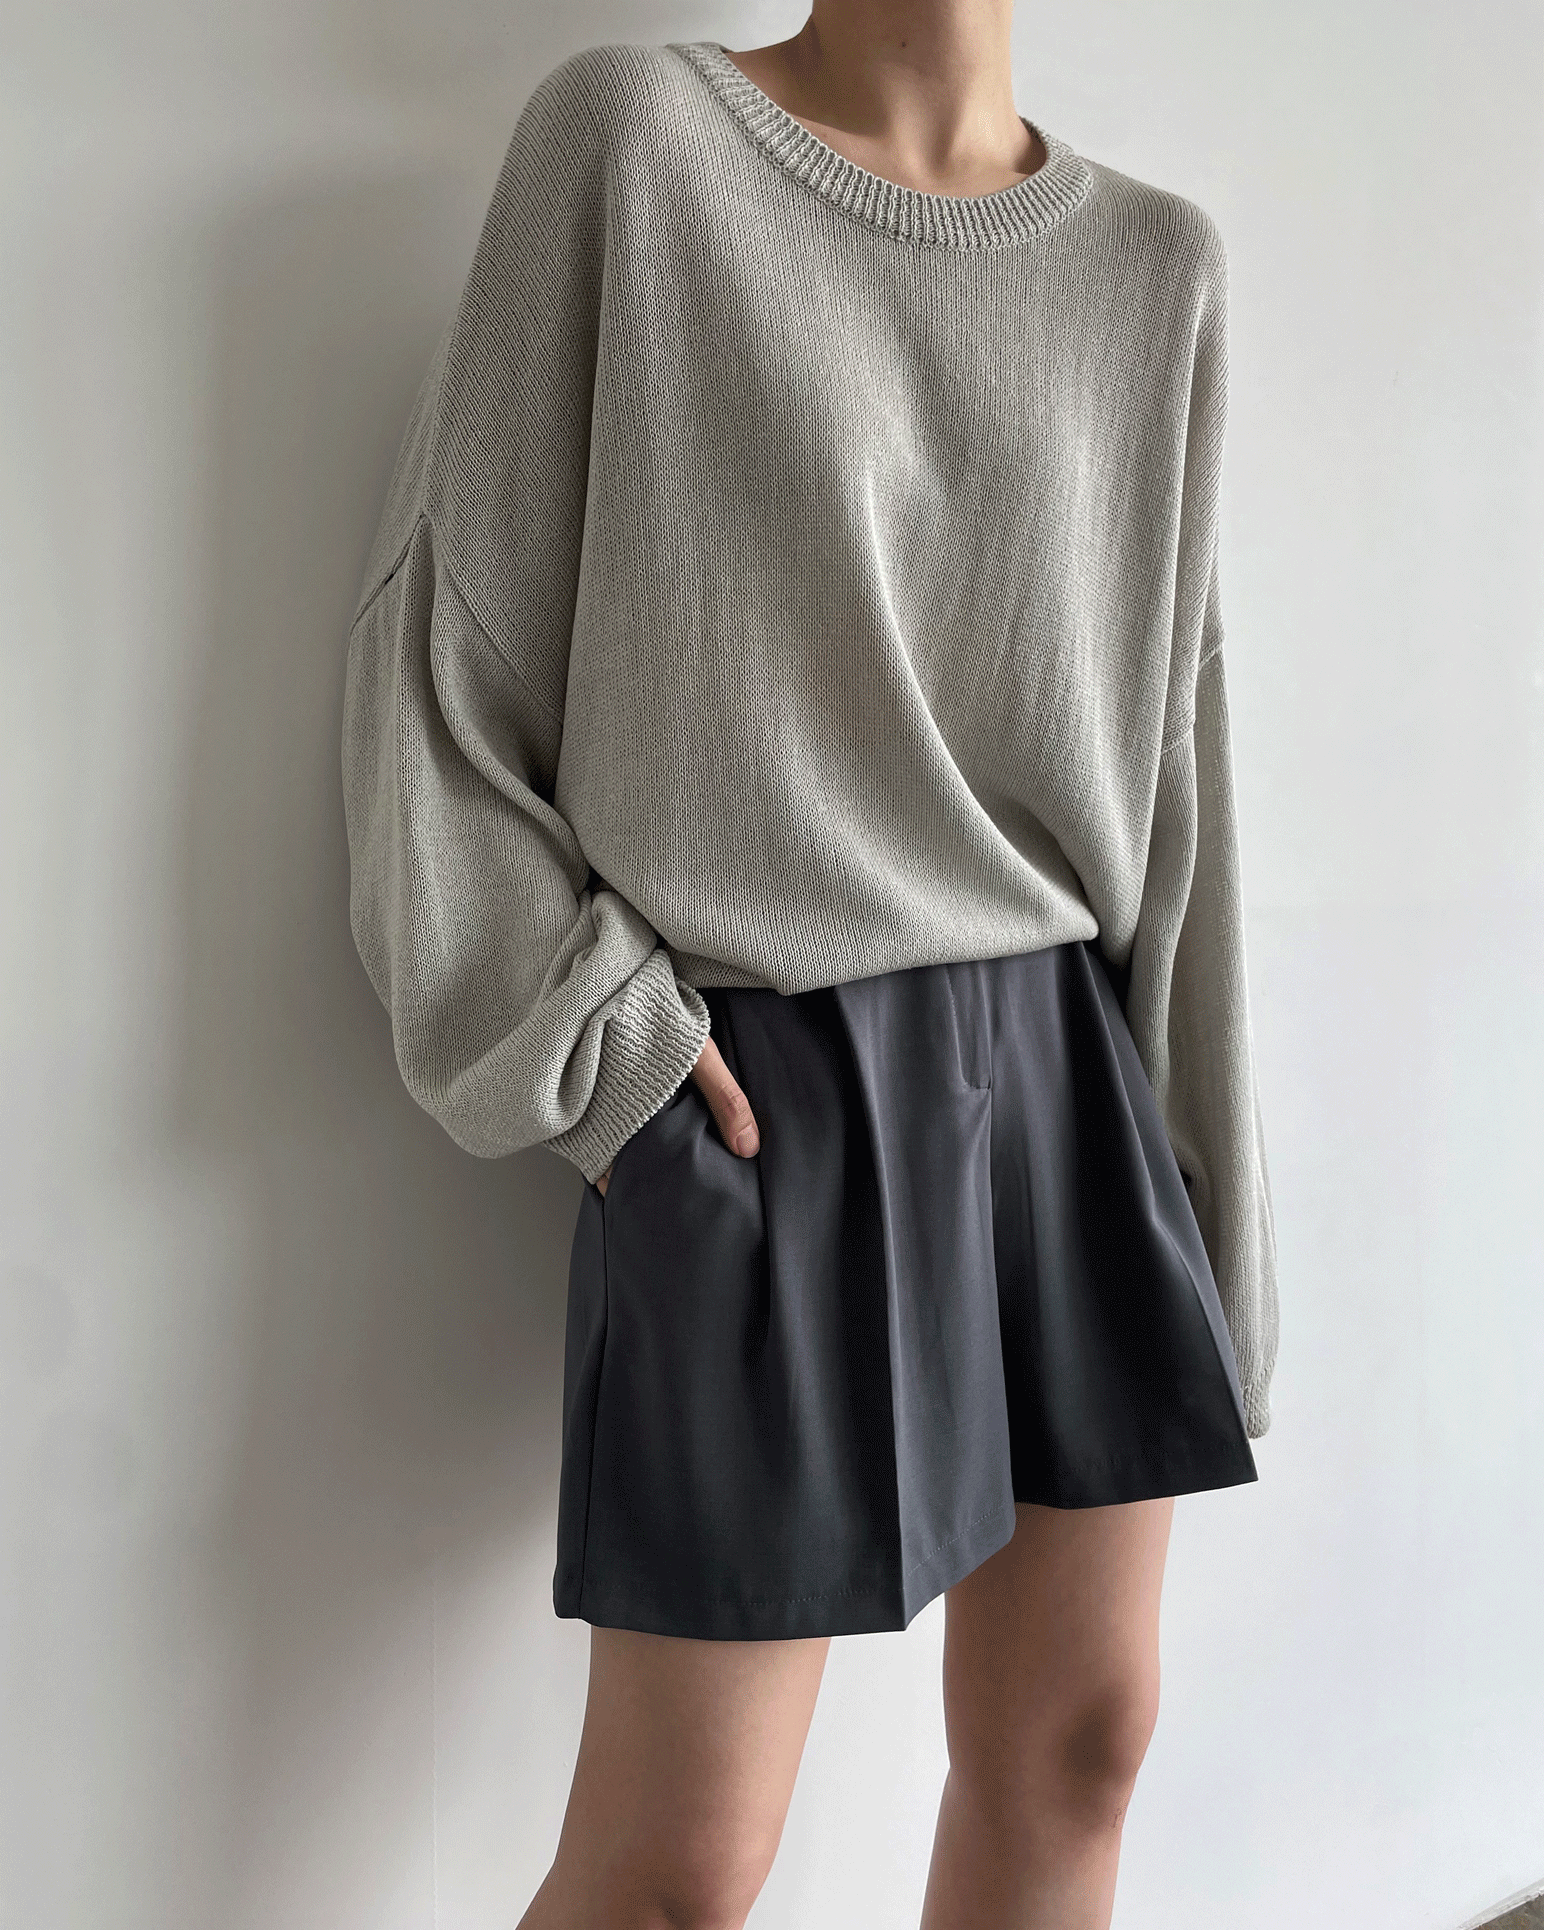 This knit